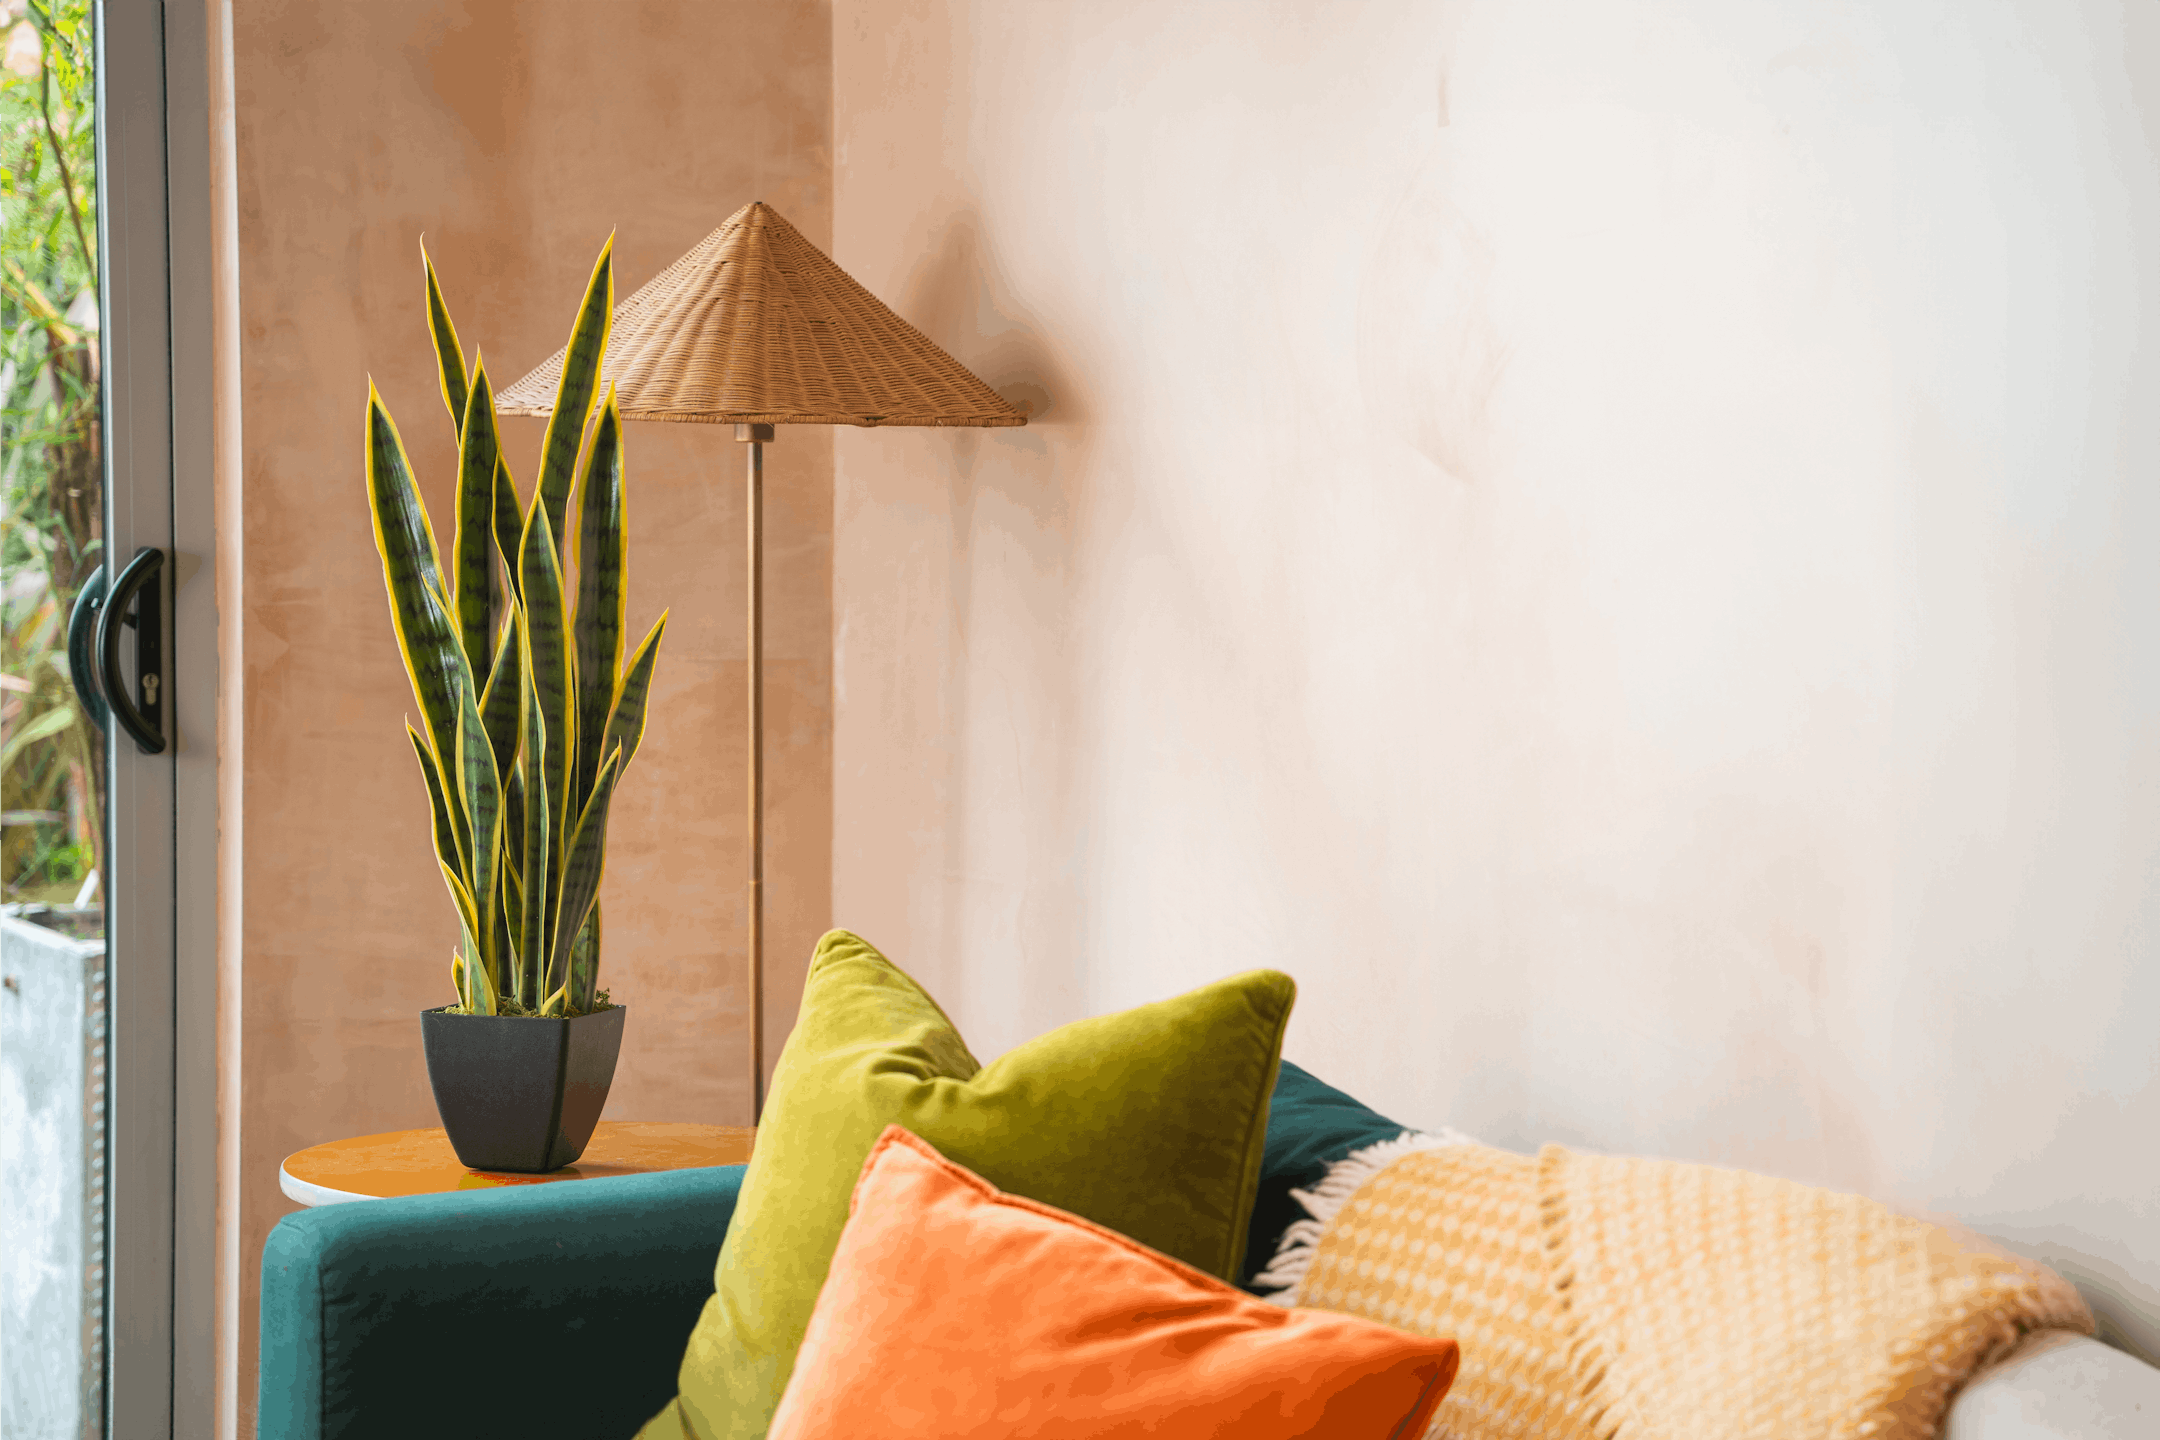 Artificial variegated sansevieria with blue sofa against raw plaster wall